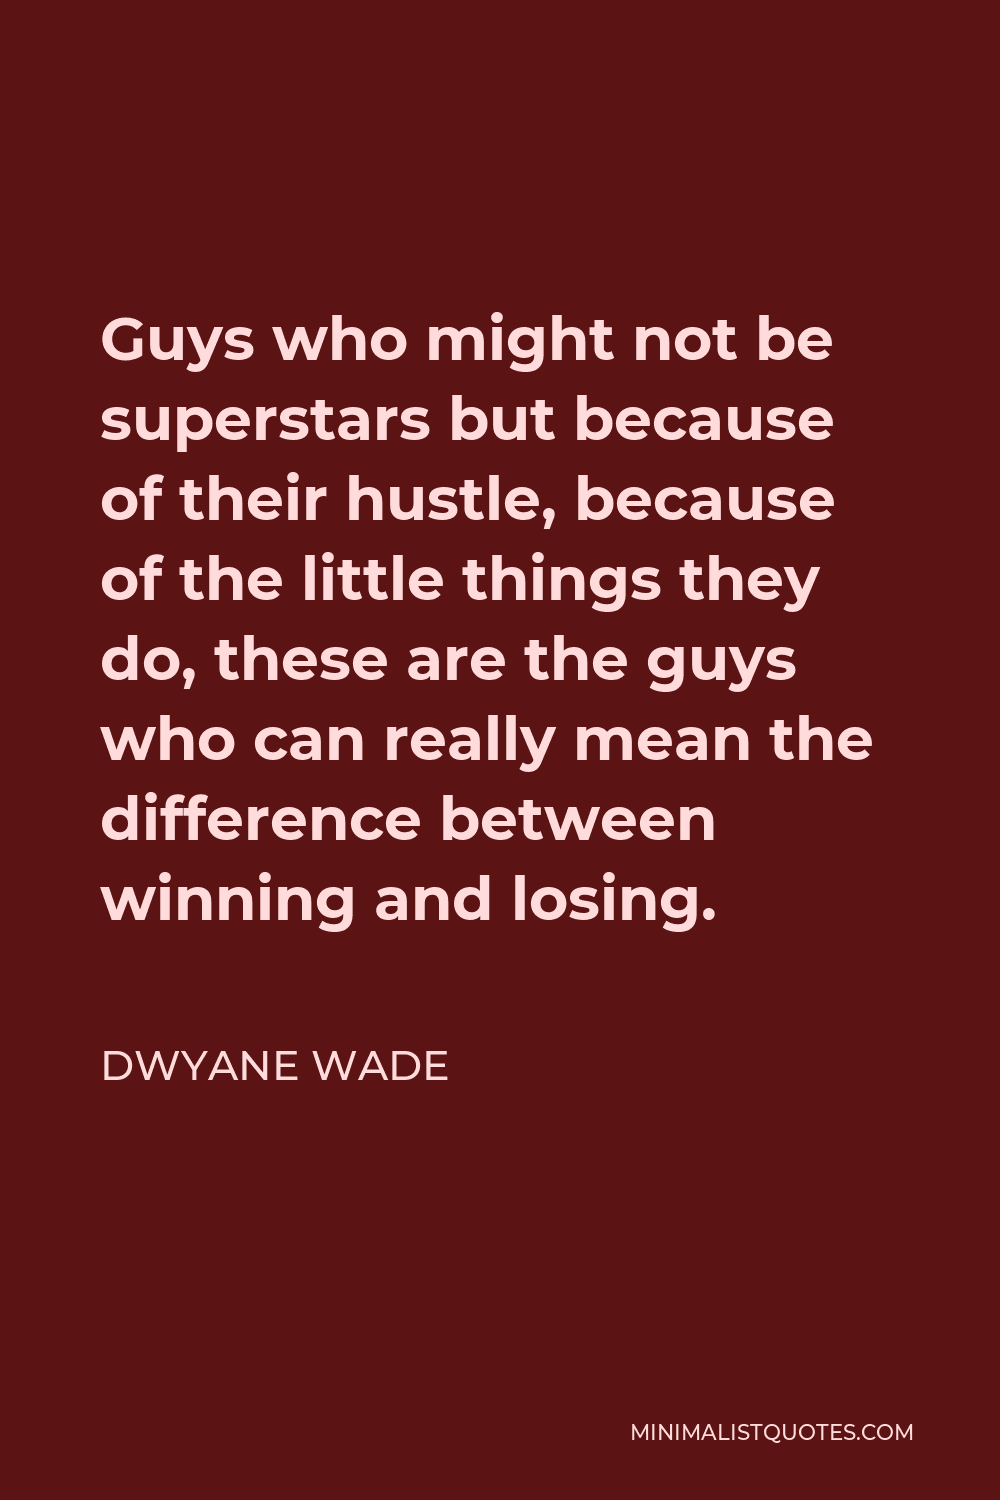 Dwyane Wade Quote - Guys who might not be superstars but because of their hustle, because of the little things they do, these are the guys who can really mean the difference between winning and losing.